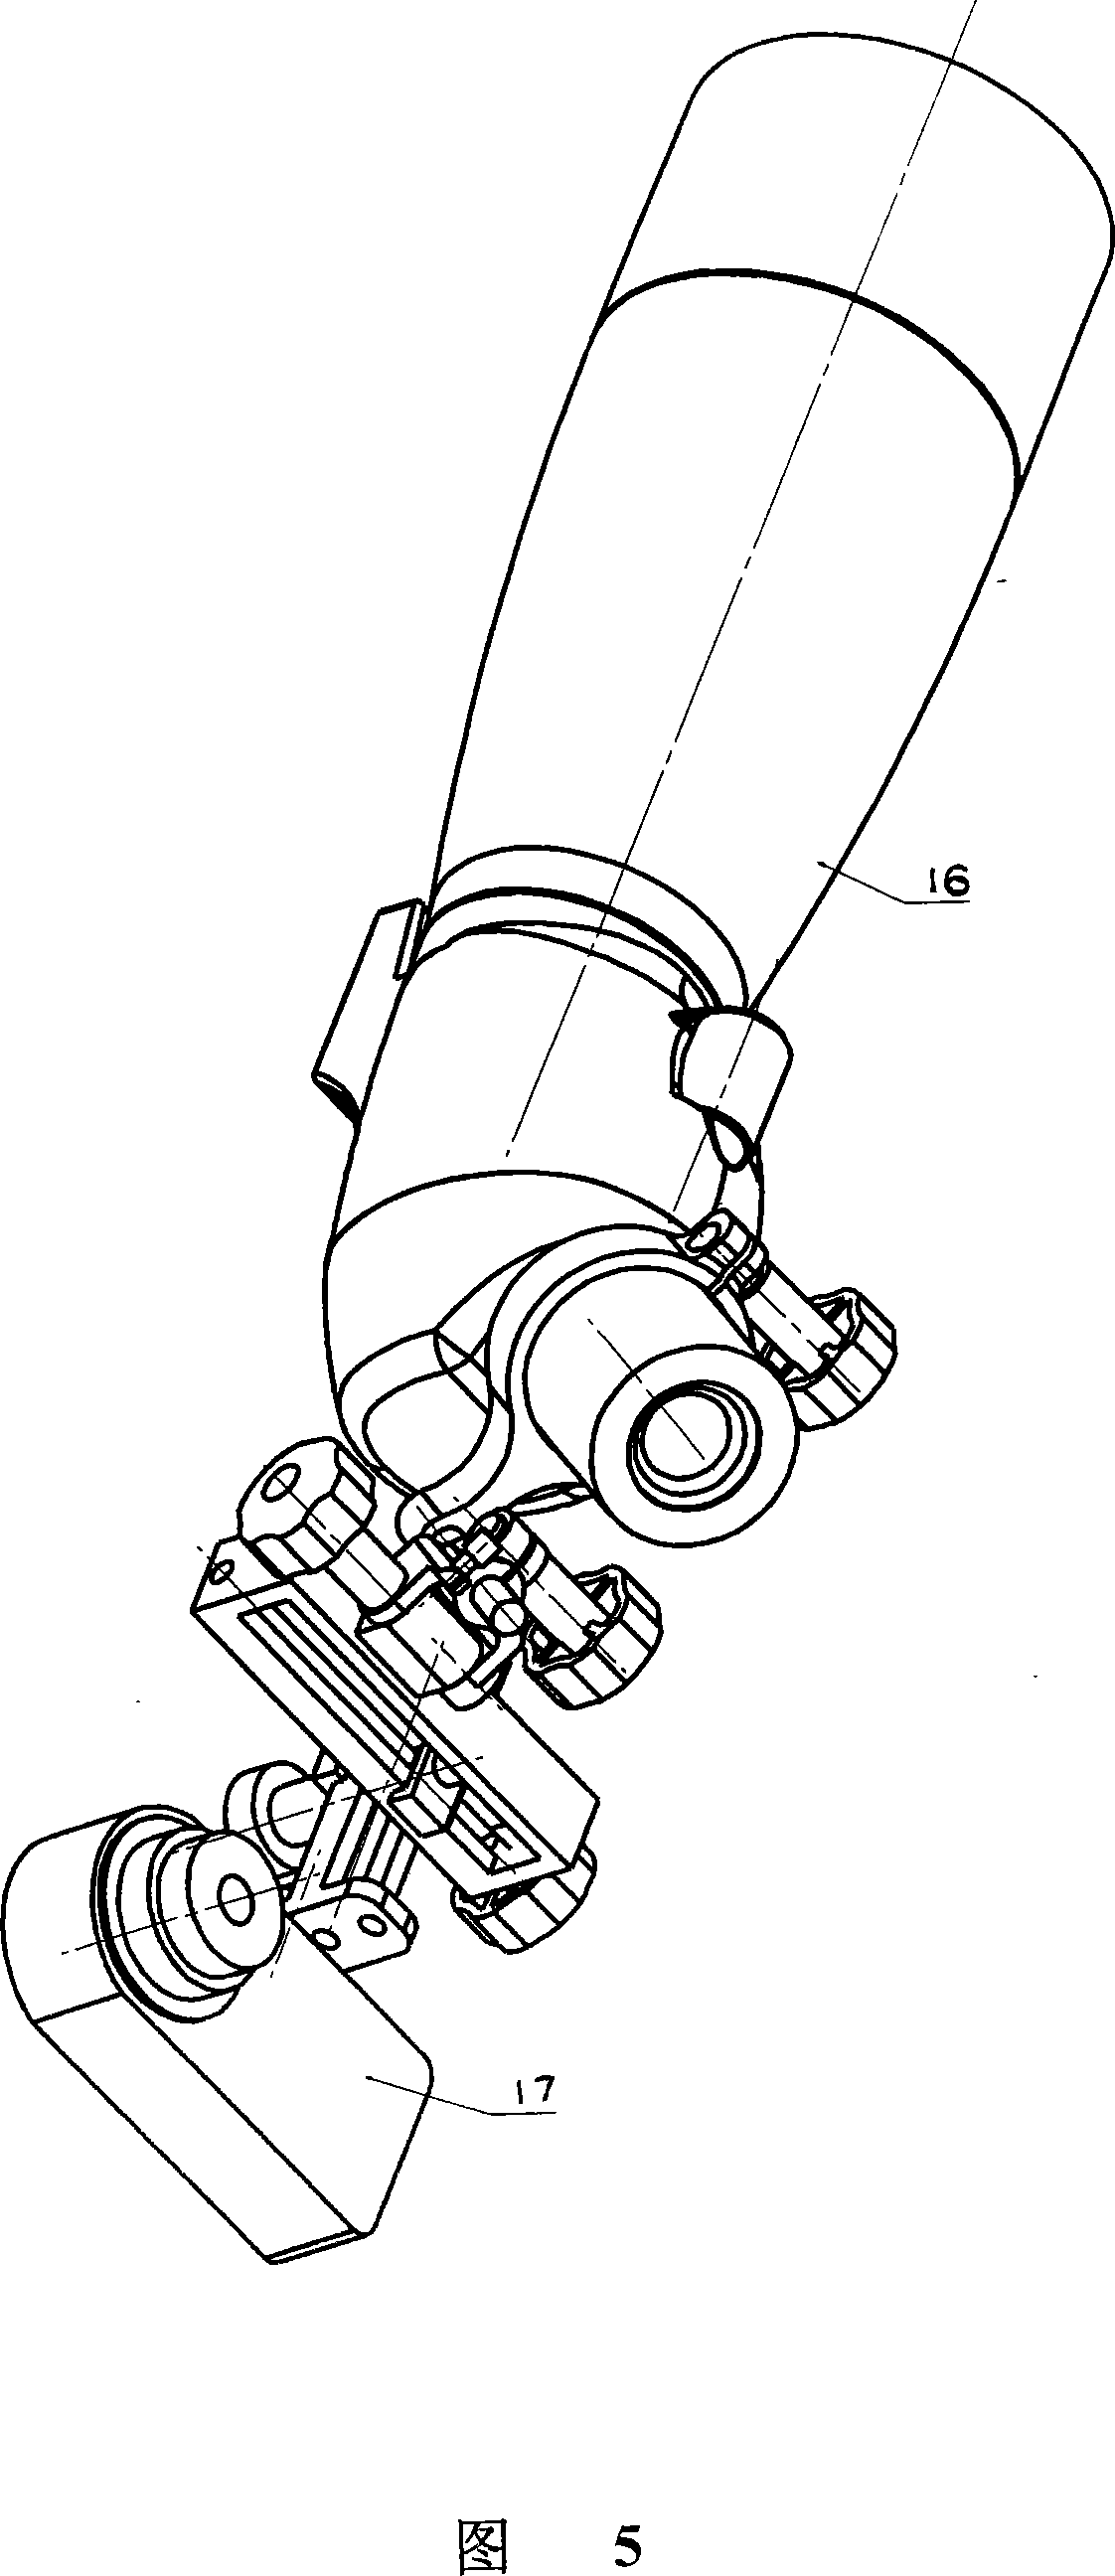 Monocular telescope series and domestic digital camera connection device and its uses